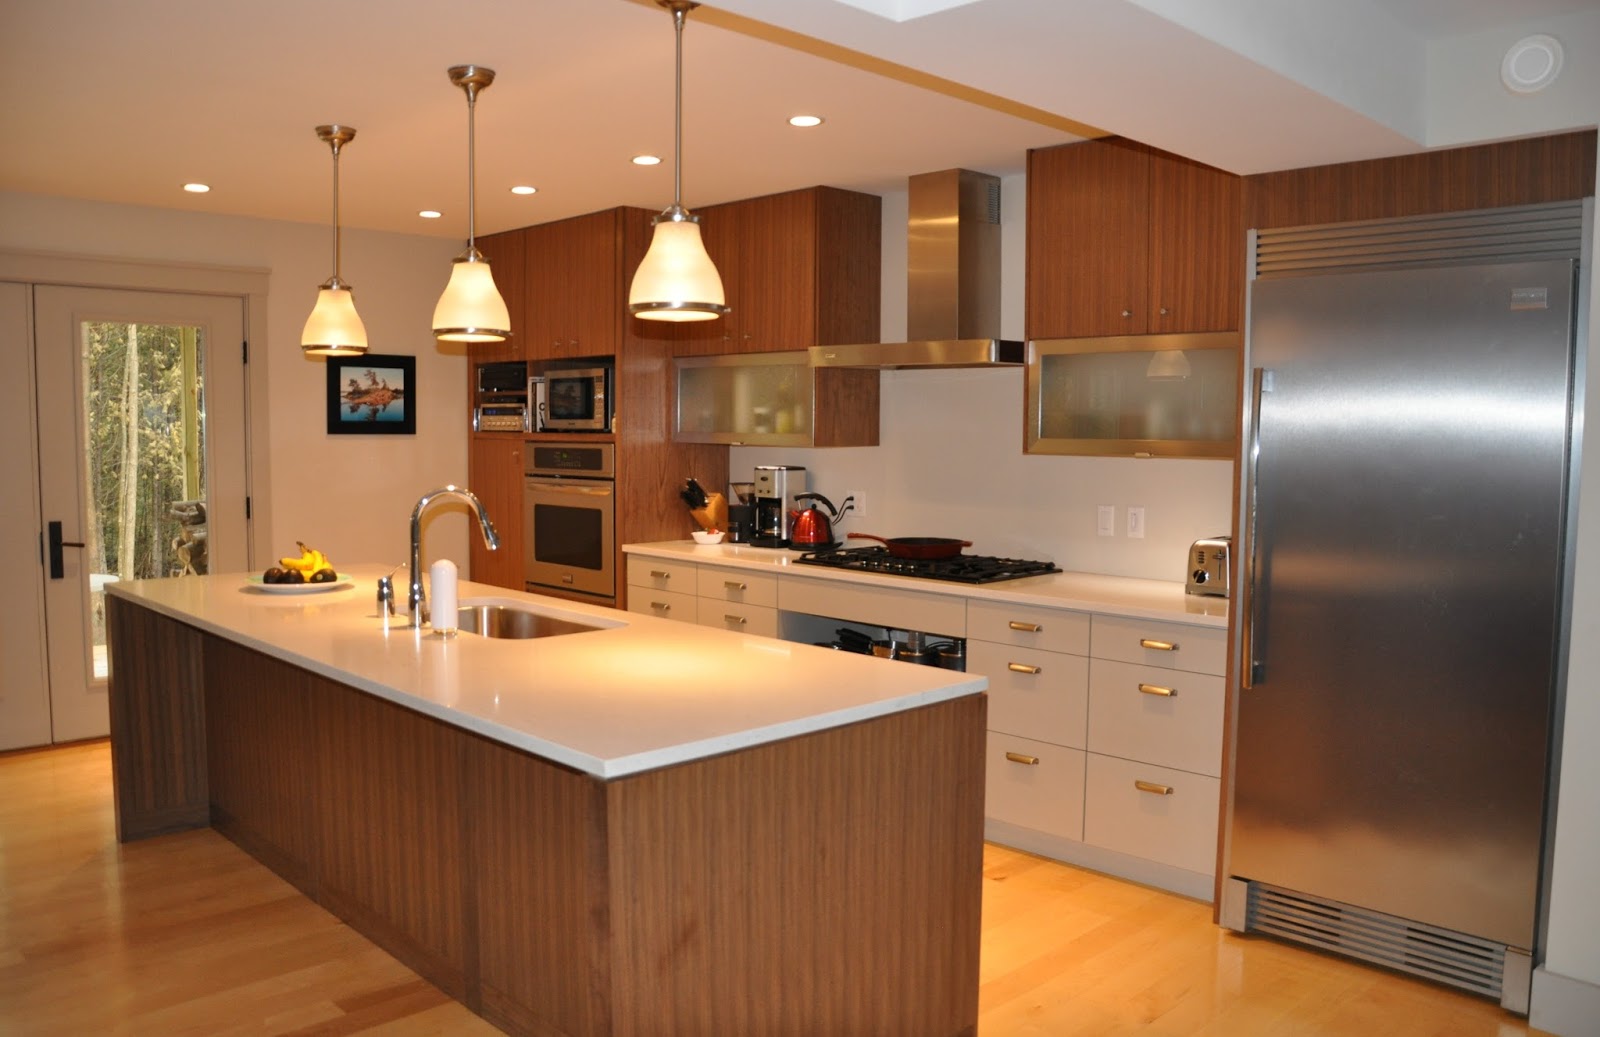 Interior ideas To Make A Morden Kitchen In Your Apartment - Funny